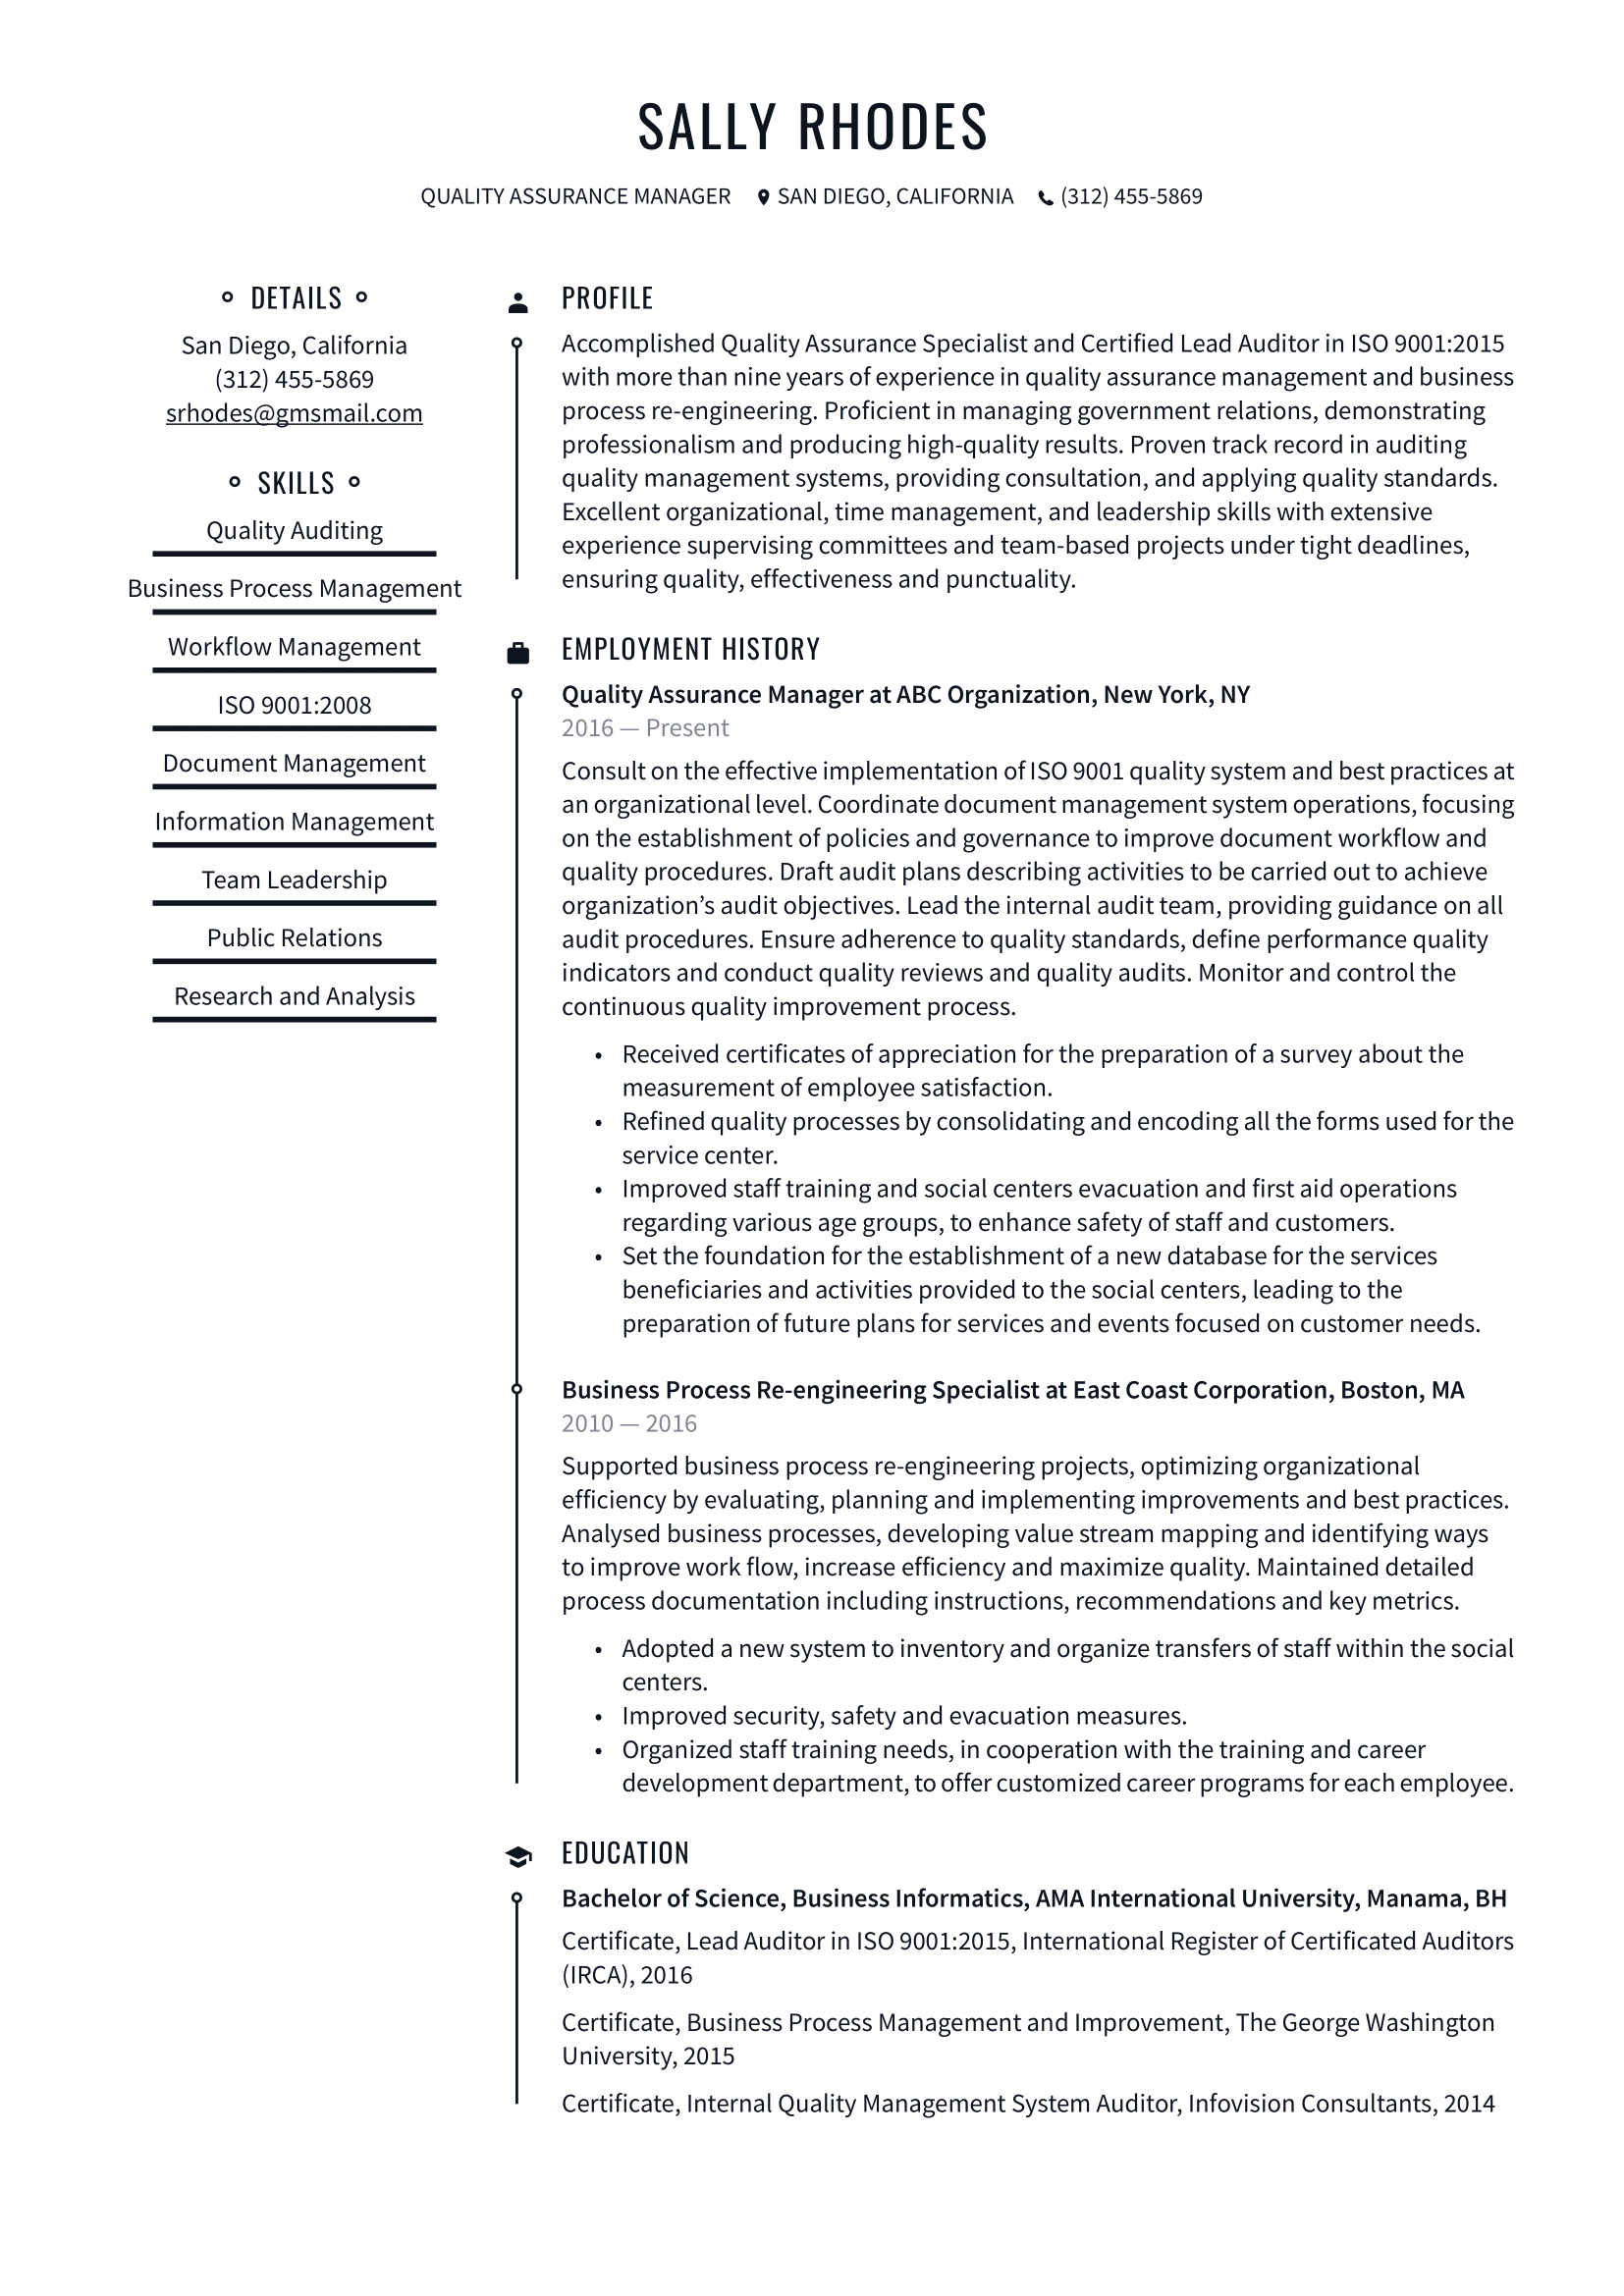 Quality Assurance Manager Resume Example & Writing Guide